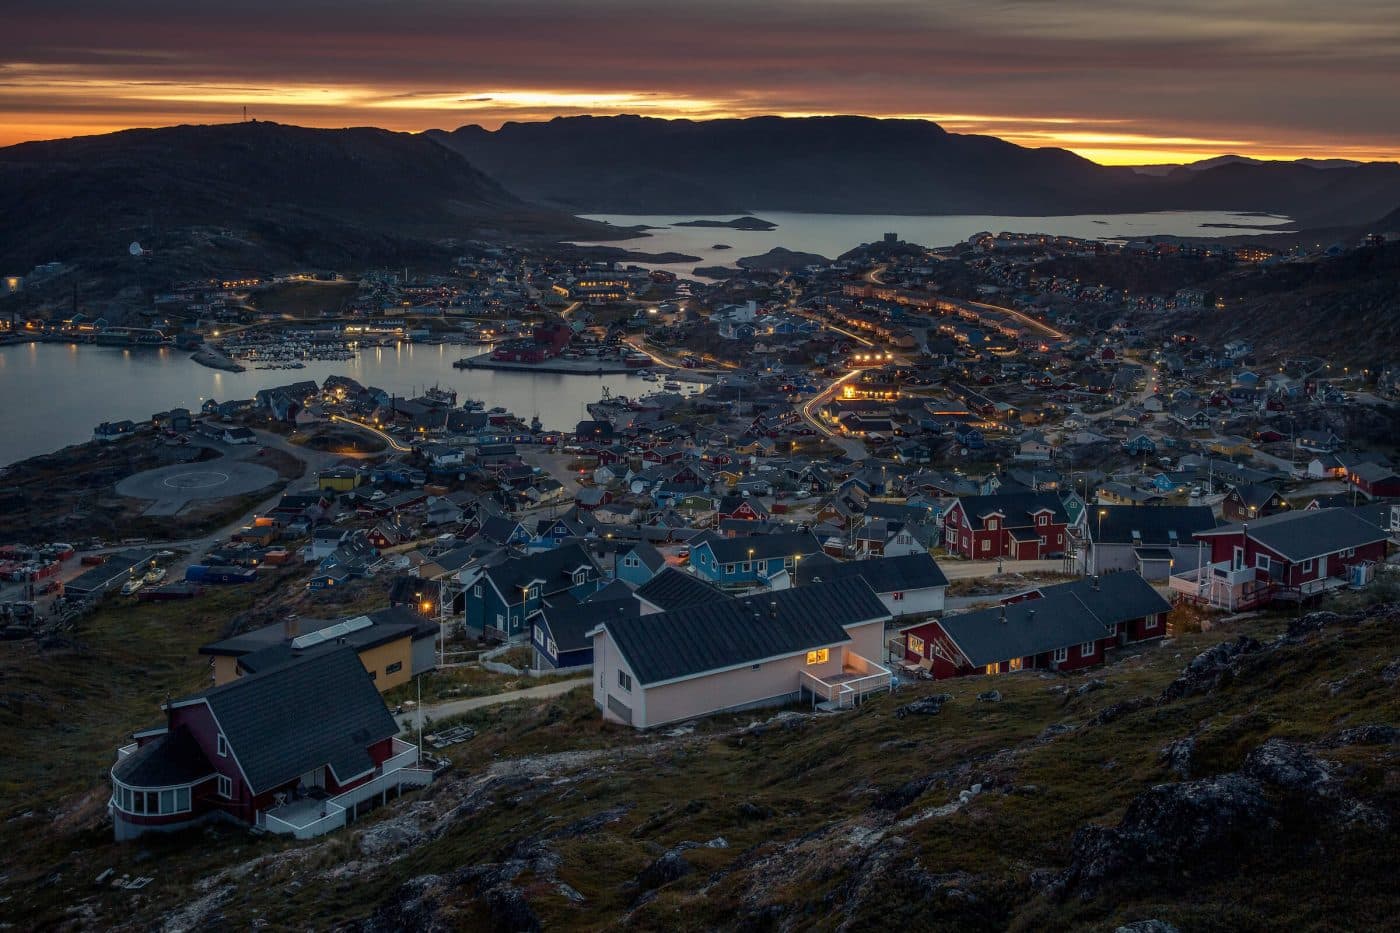 A nighttime panoramic view of Qaqortoq in South Greenland. Photo by Mads Pihl.